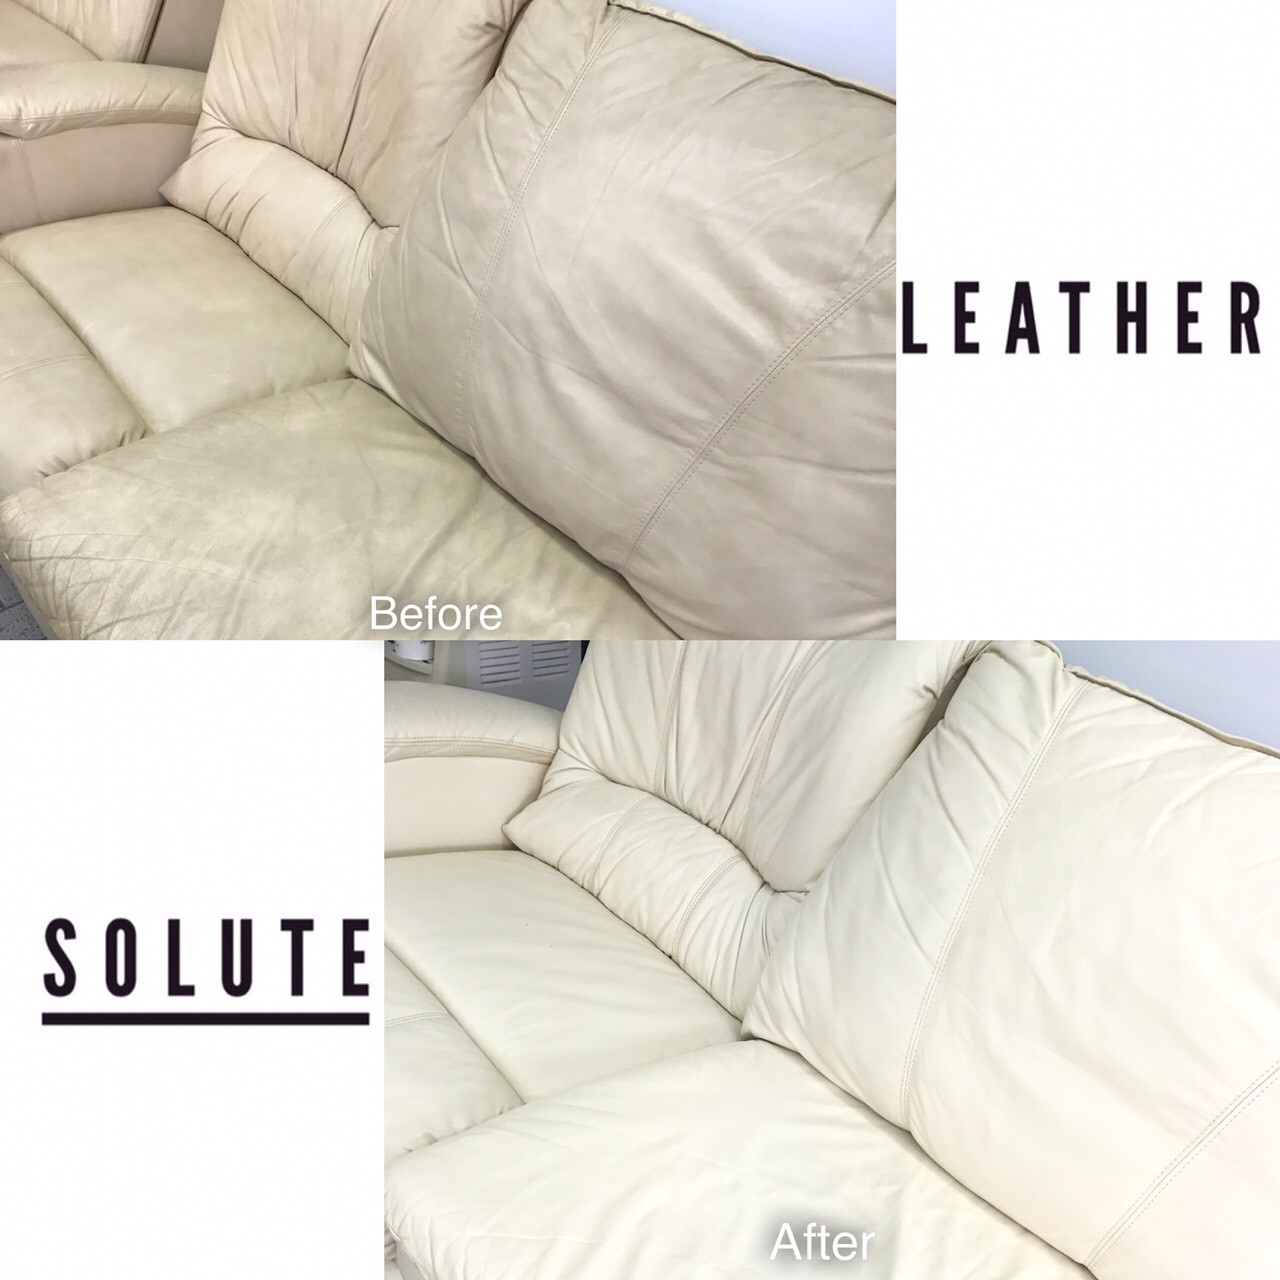 //www.leathersolute.co.th/wp-content/uploads/2018/12/Cleaning-furniture_๑๘๑๒๓๐_0007.jpg